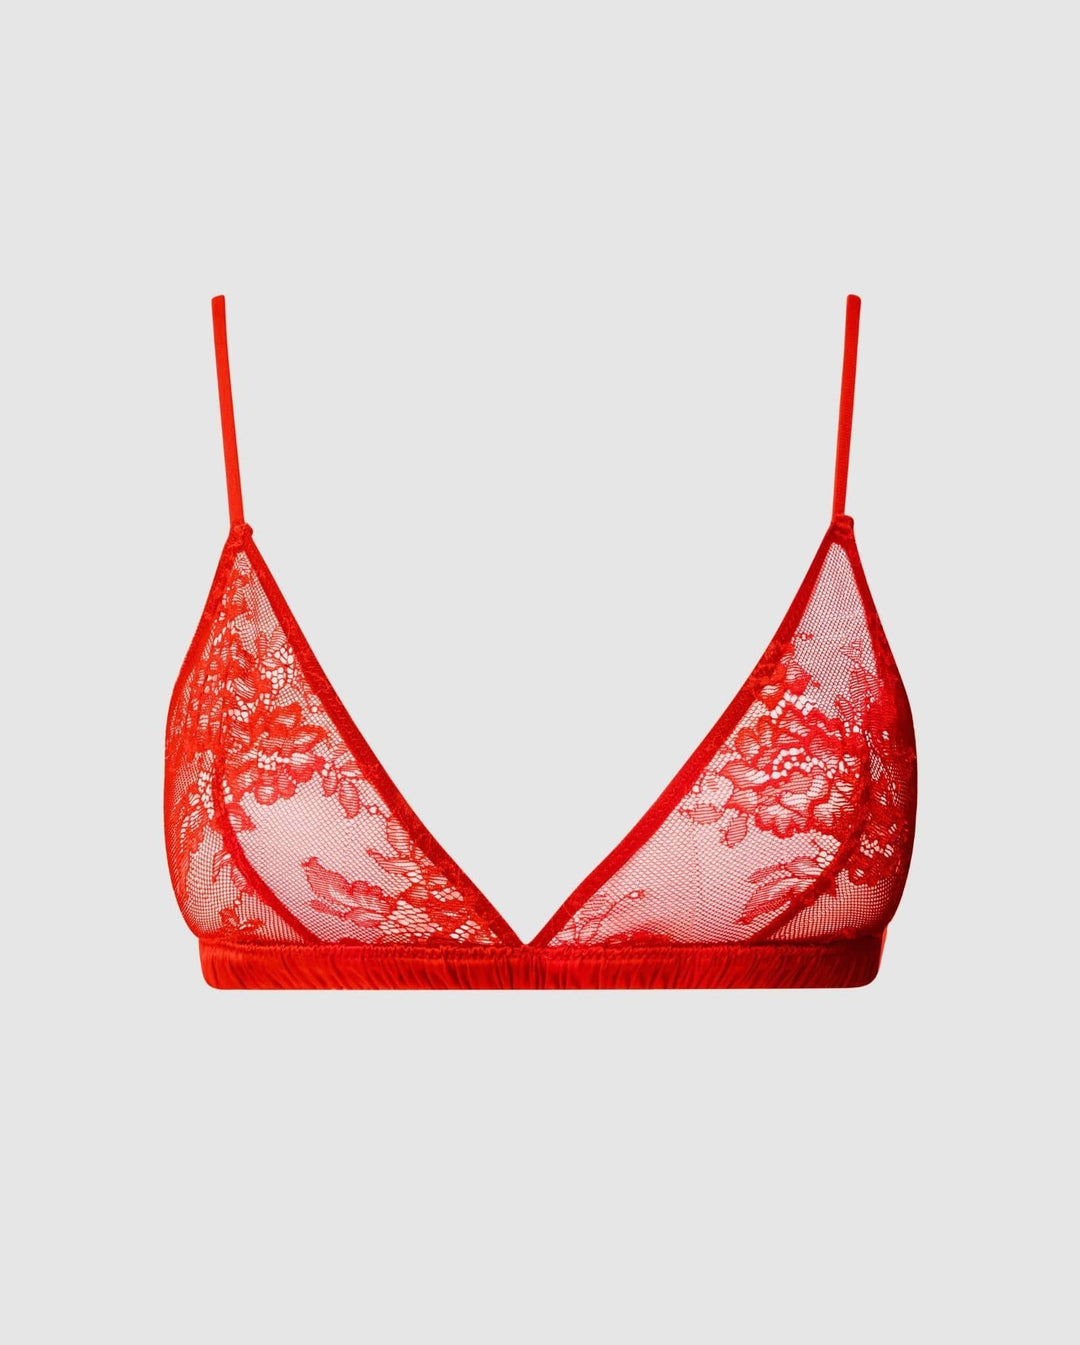 Satine Red Triangle bra with tulle and fabric with velvety flowers -  ai!culotte lencería sostenible hecha a mano